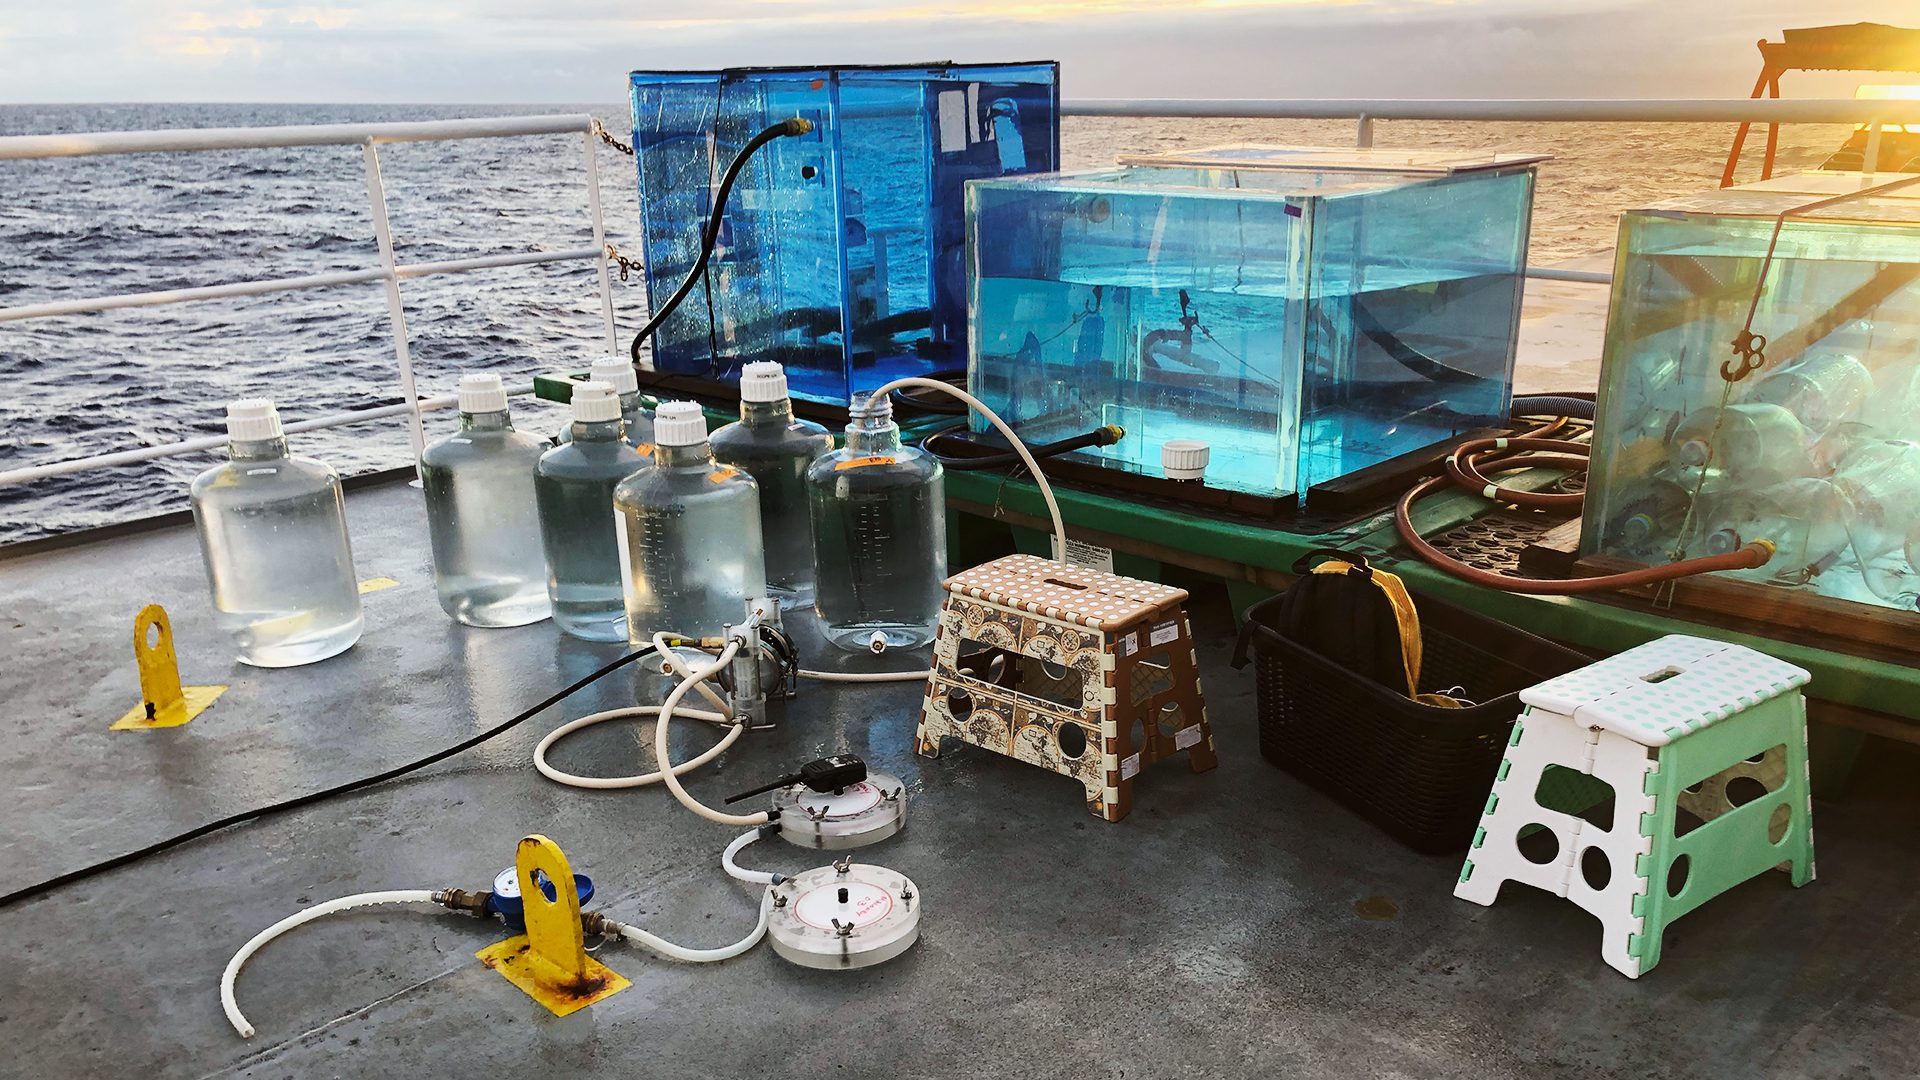 WHOI researchers tested the effects of adding alkalinity to seawater in a series of experiments at sea. The large blue tanks shown here were kept at a sea surface temperature and light level that would be found at 15 meters (49 feet). Researchers then filtered the water through circular disks (in the foreground) to sample the remaining particulate material after incubation. (Photo by Ashley Maloney, Princeton University)